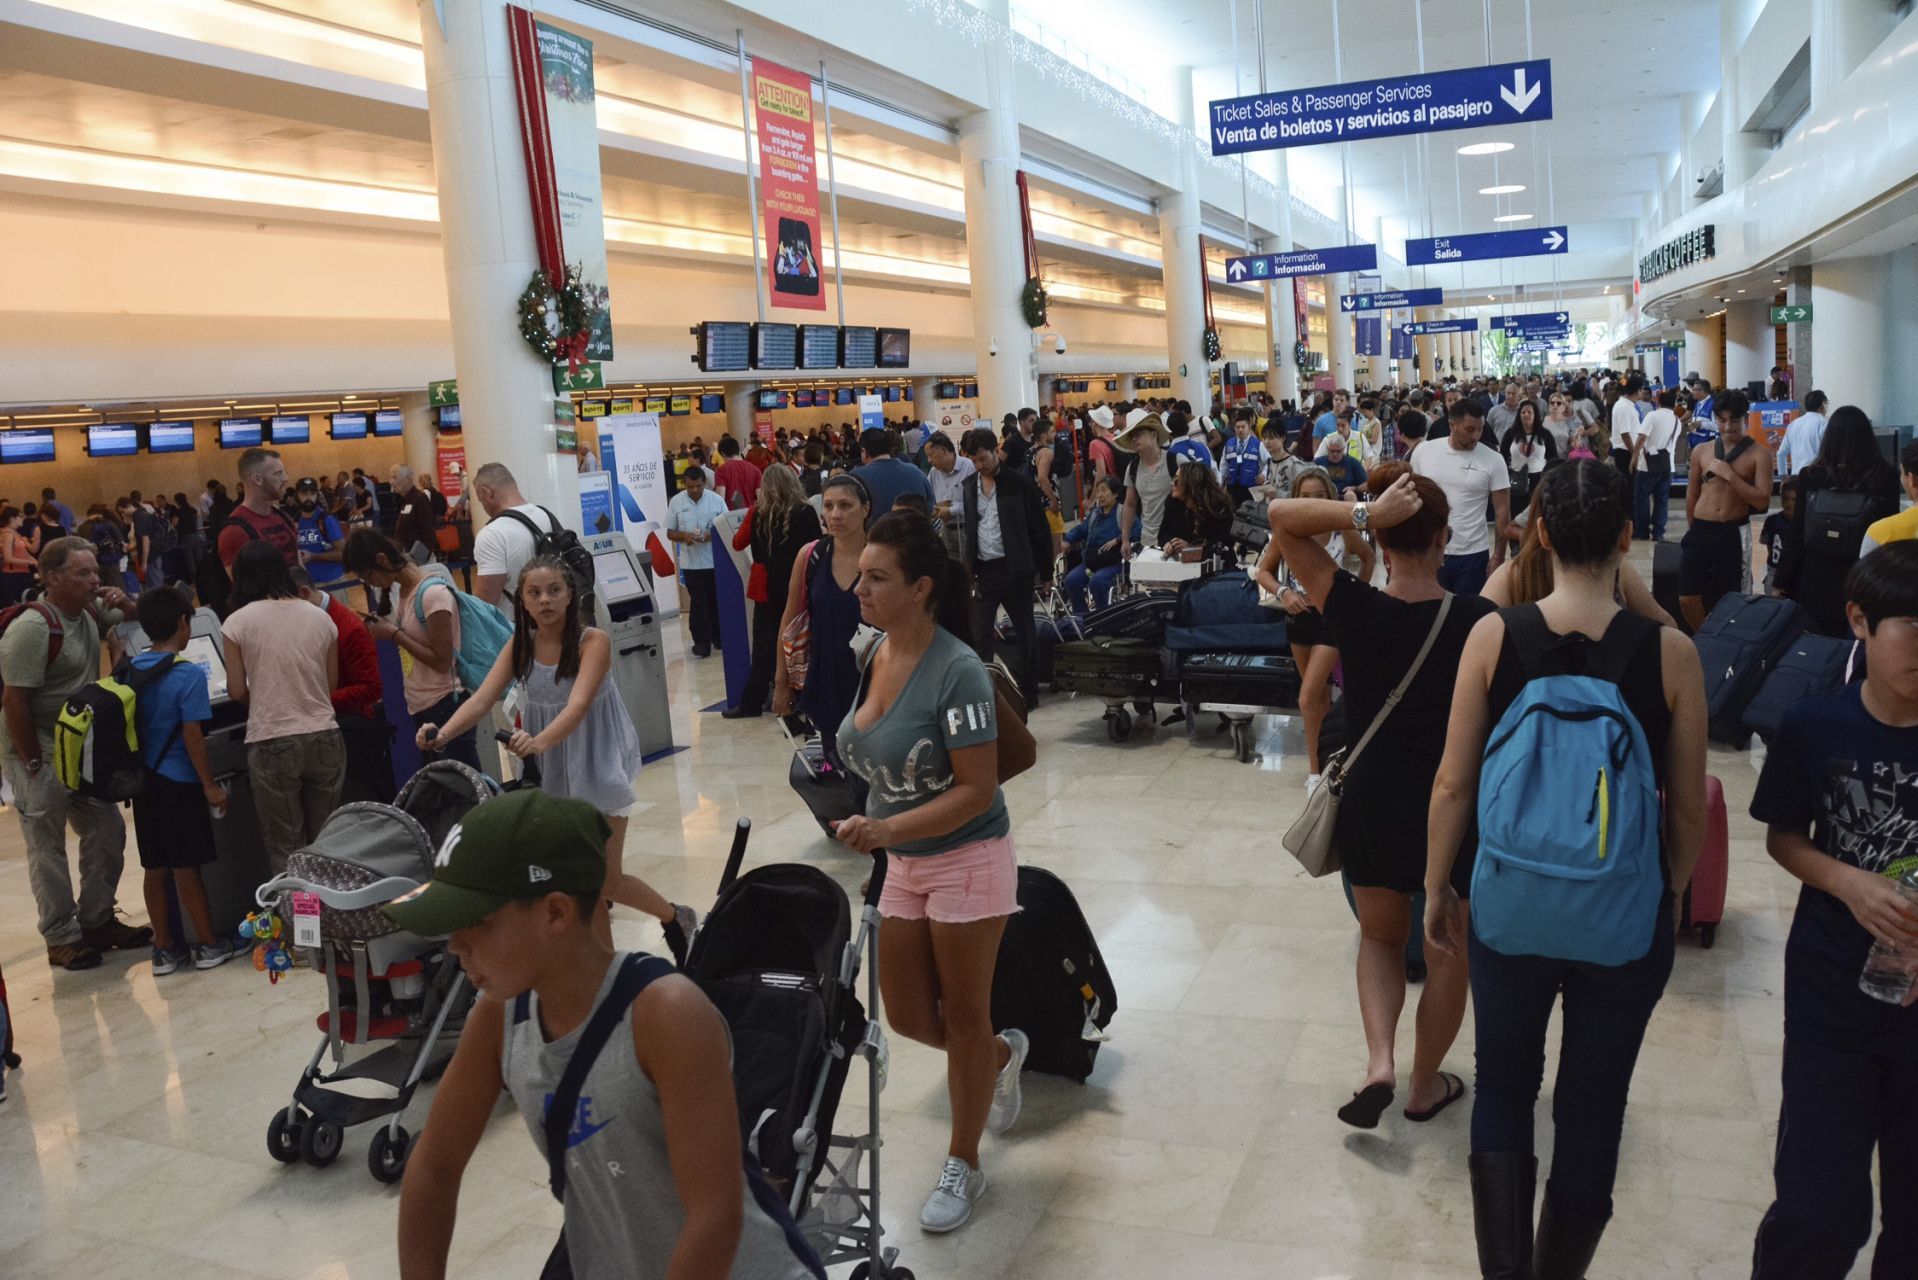 CANCÚN, QUINTANA ROO, DECEMBER 26, 2016.- State Governor Carlos Joaquín González received the 21 millionth passenger at the Cancun International Airport.  The terminal is full of vacationers.  PHOTO: ELIZABETH RUIZ /CUARTOSCURO.COM